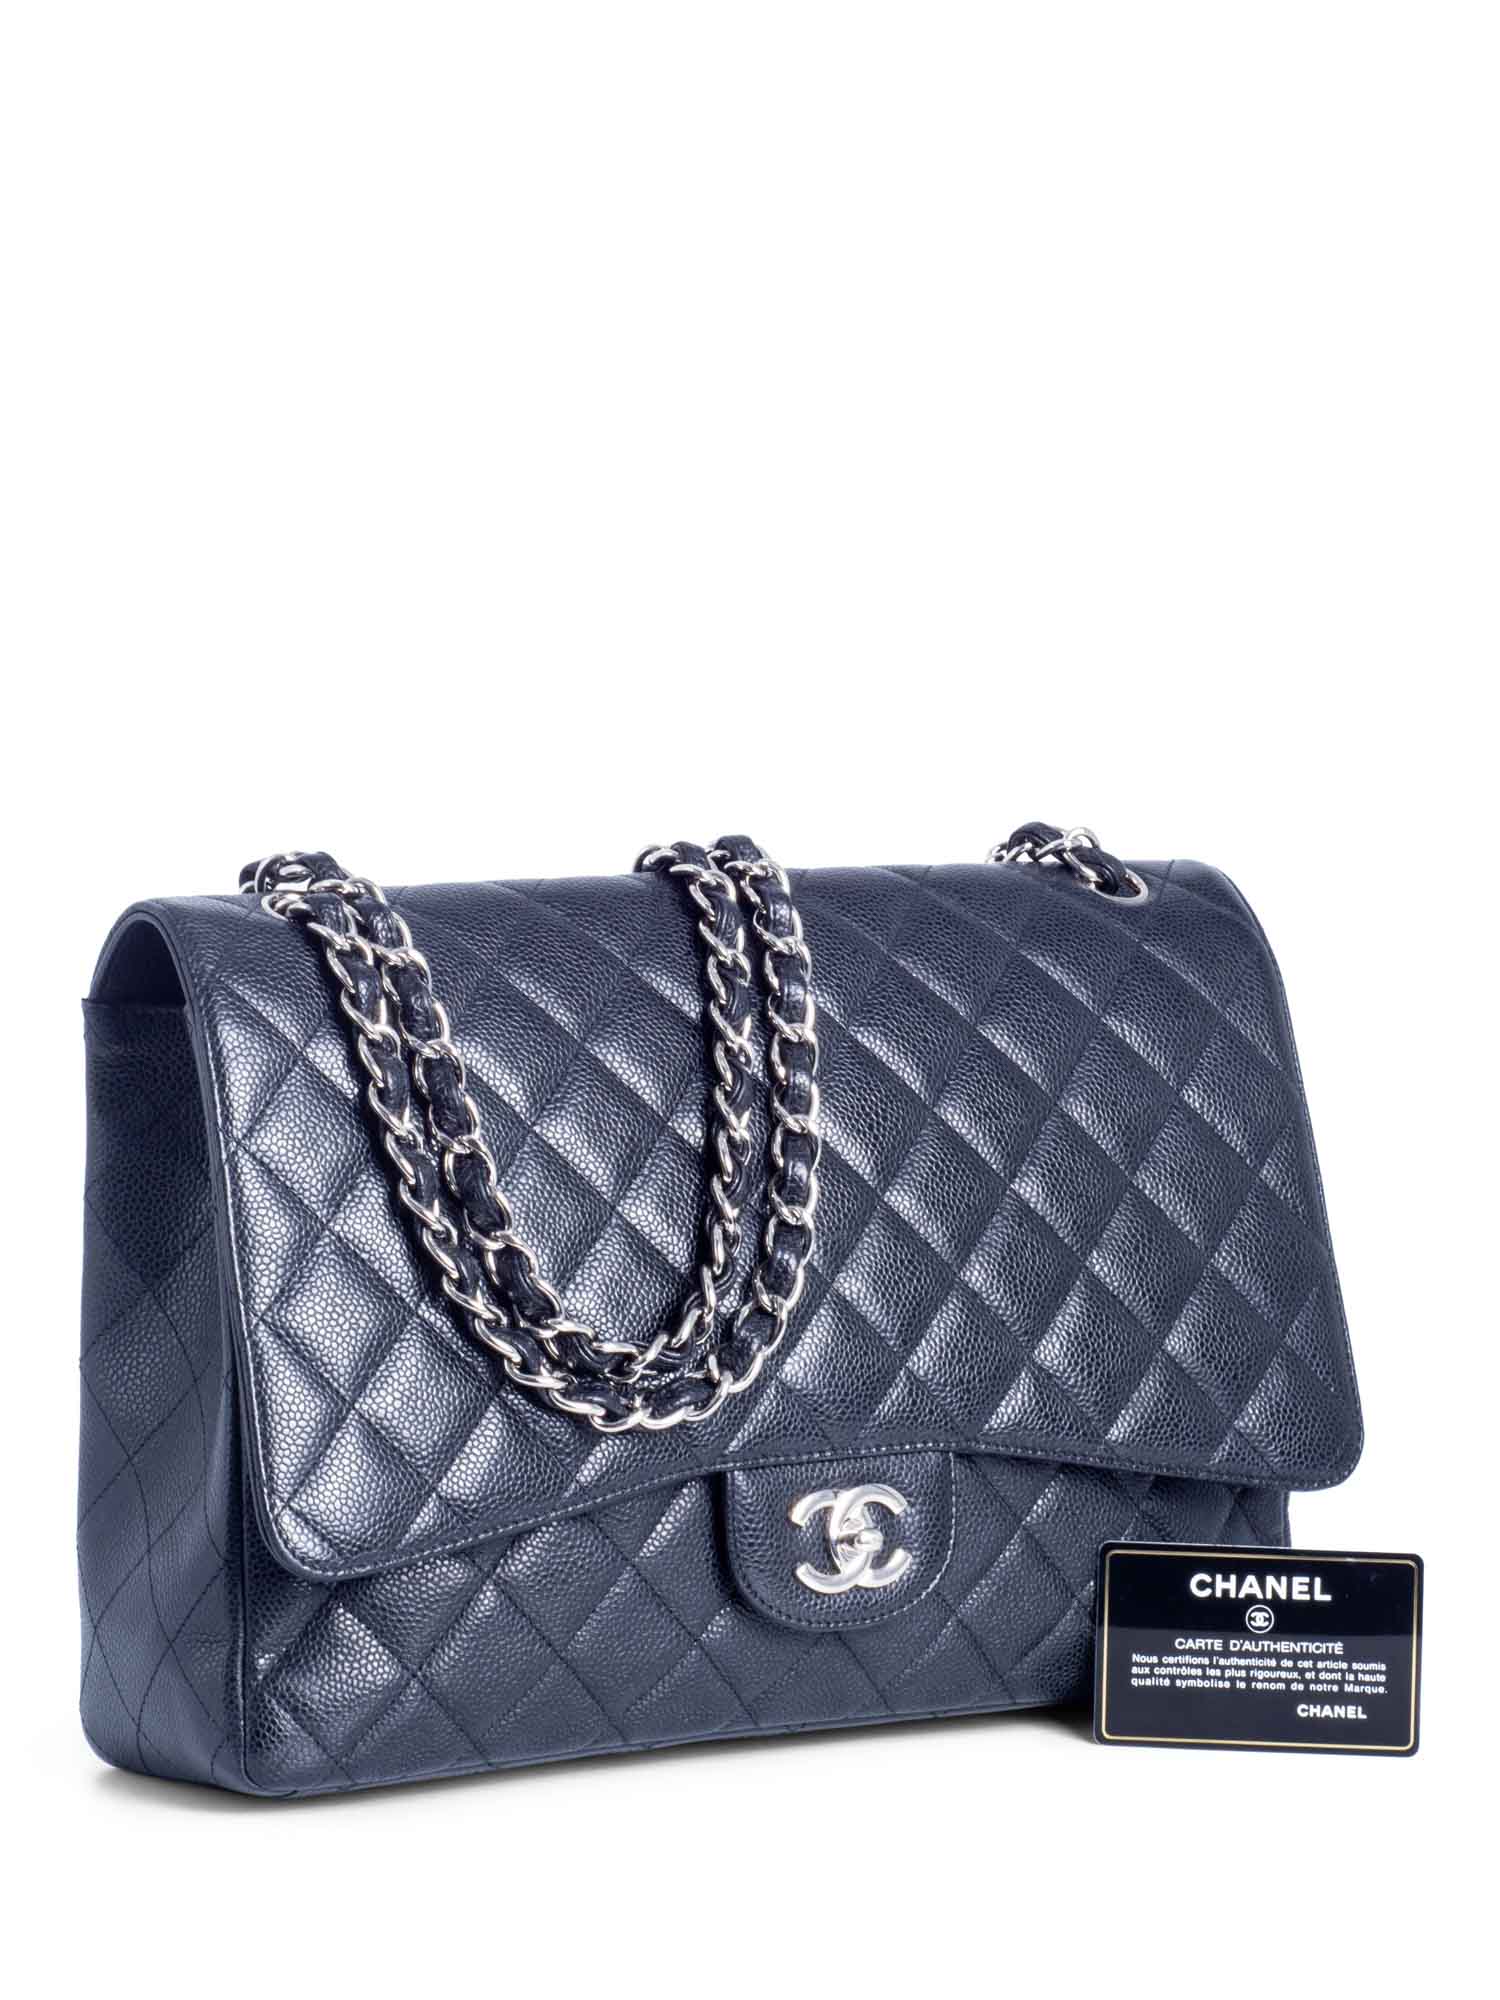 CHANEL  Bags  Chanel Serial Number  Poshmark